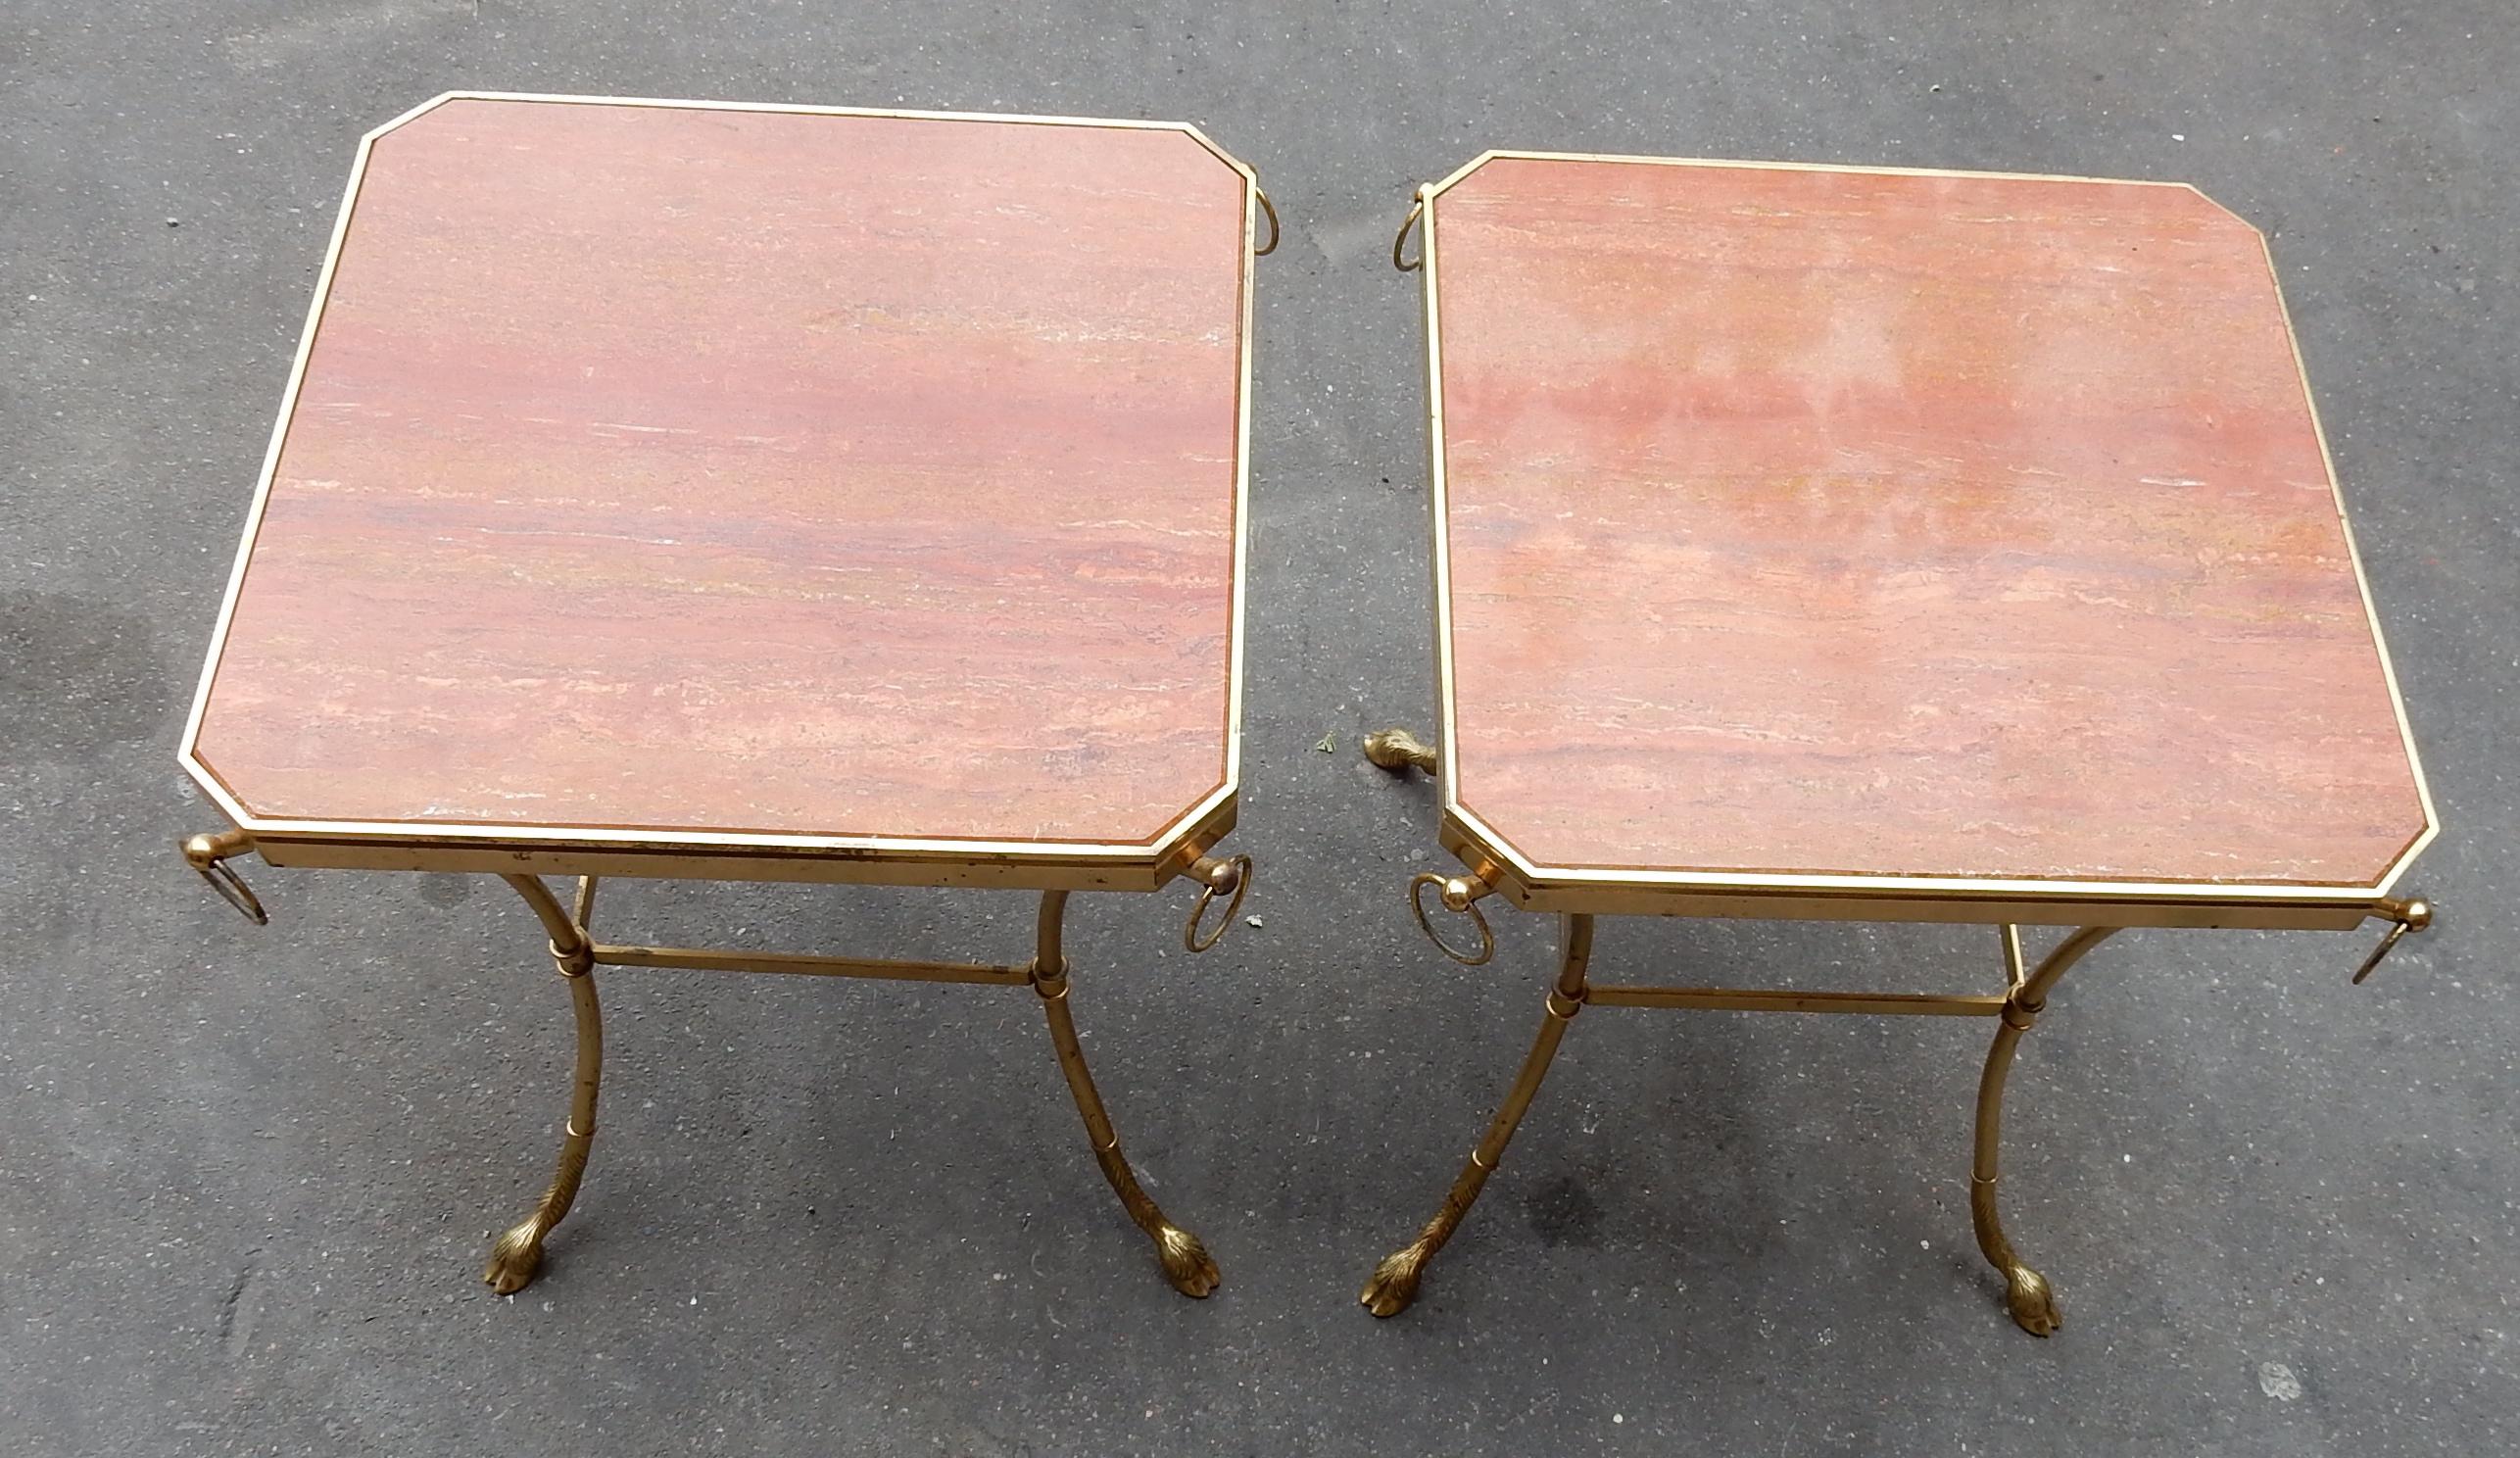 Pair of octagonal pedestal gilt bronze with rings in belt and crowbars, trays in red travertine of Iran, Sticker Jacques Charpentier, designer of Maison Jansen and Roche Bobois, everything is screw, Good condition, circa 1950-1970.